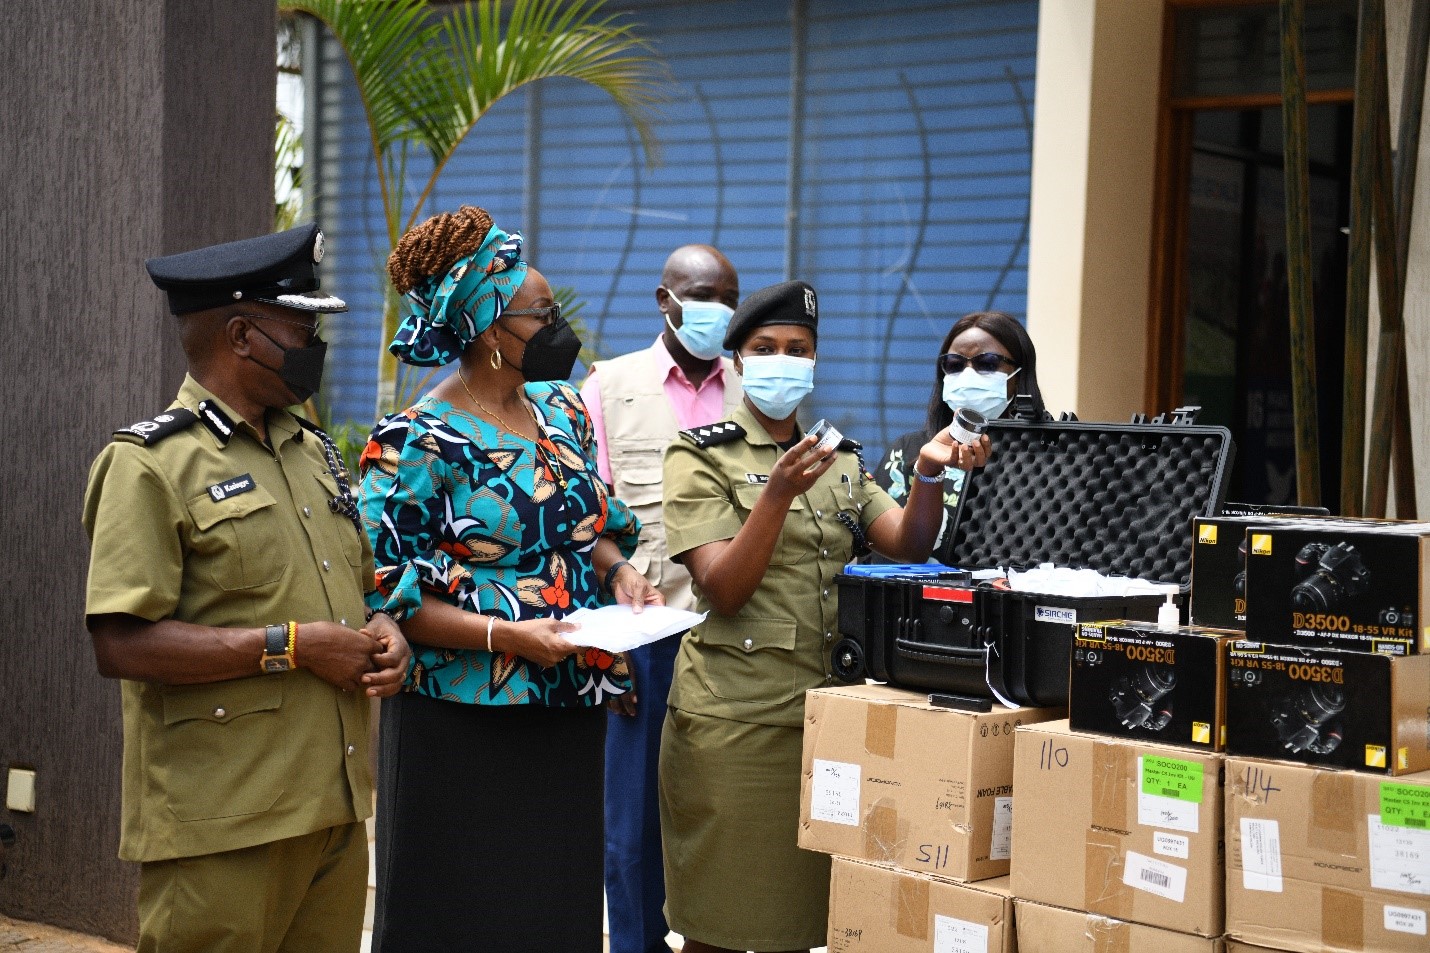 Head DNA Section ASP Doris Lillian Mutesi took onlookers through use of the Scene of Crime kits at the official handover of the equipment in February 2022 